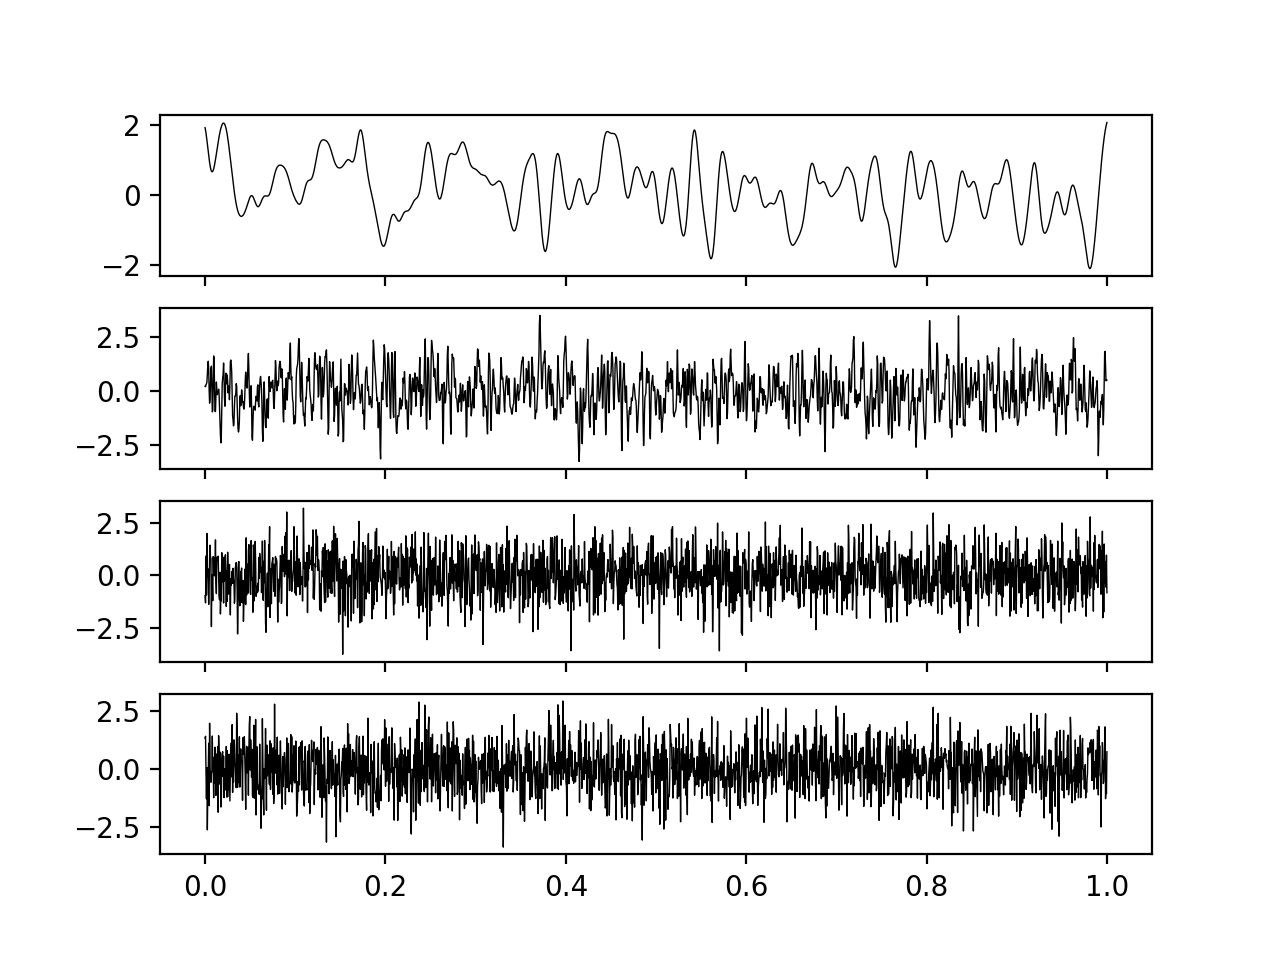 Noise draws from an RBF Gaussian process with varying lengthscale